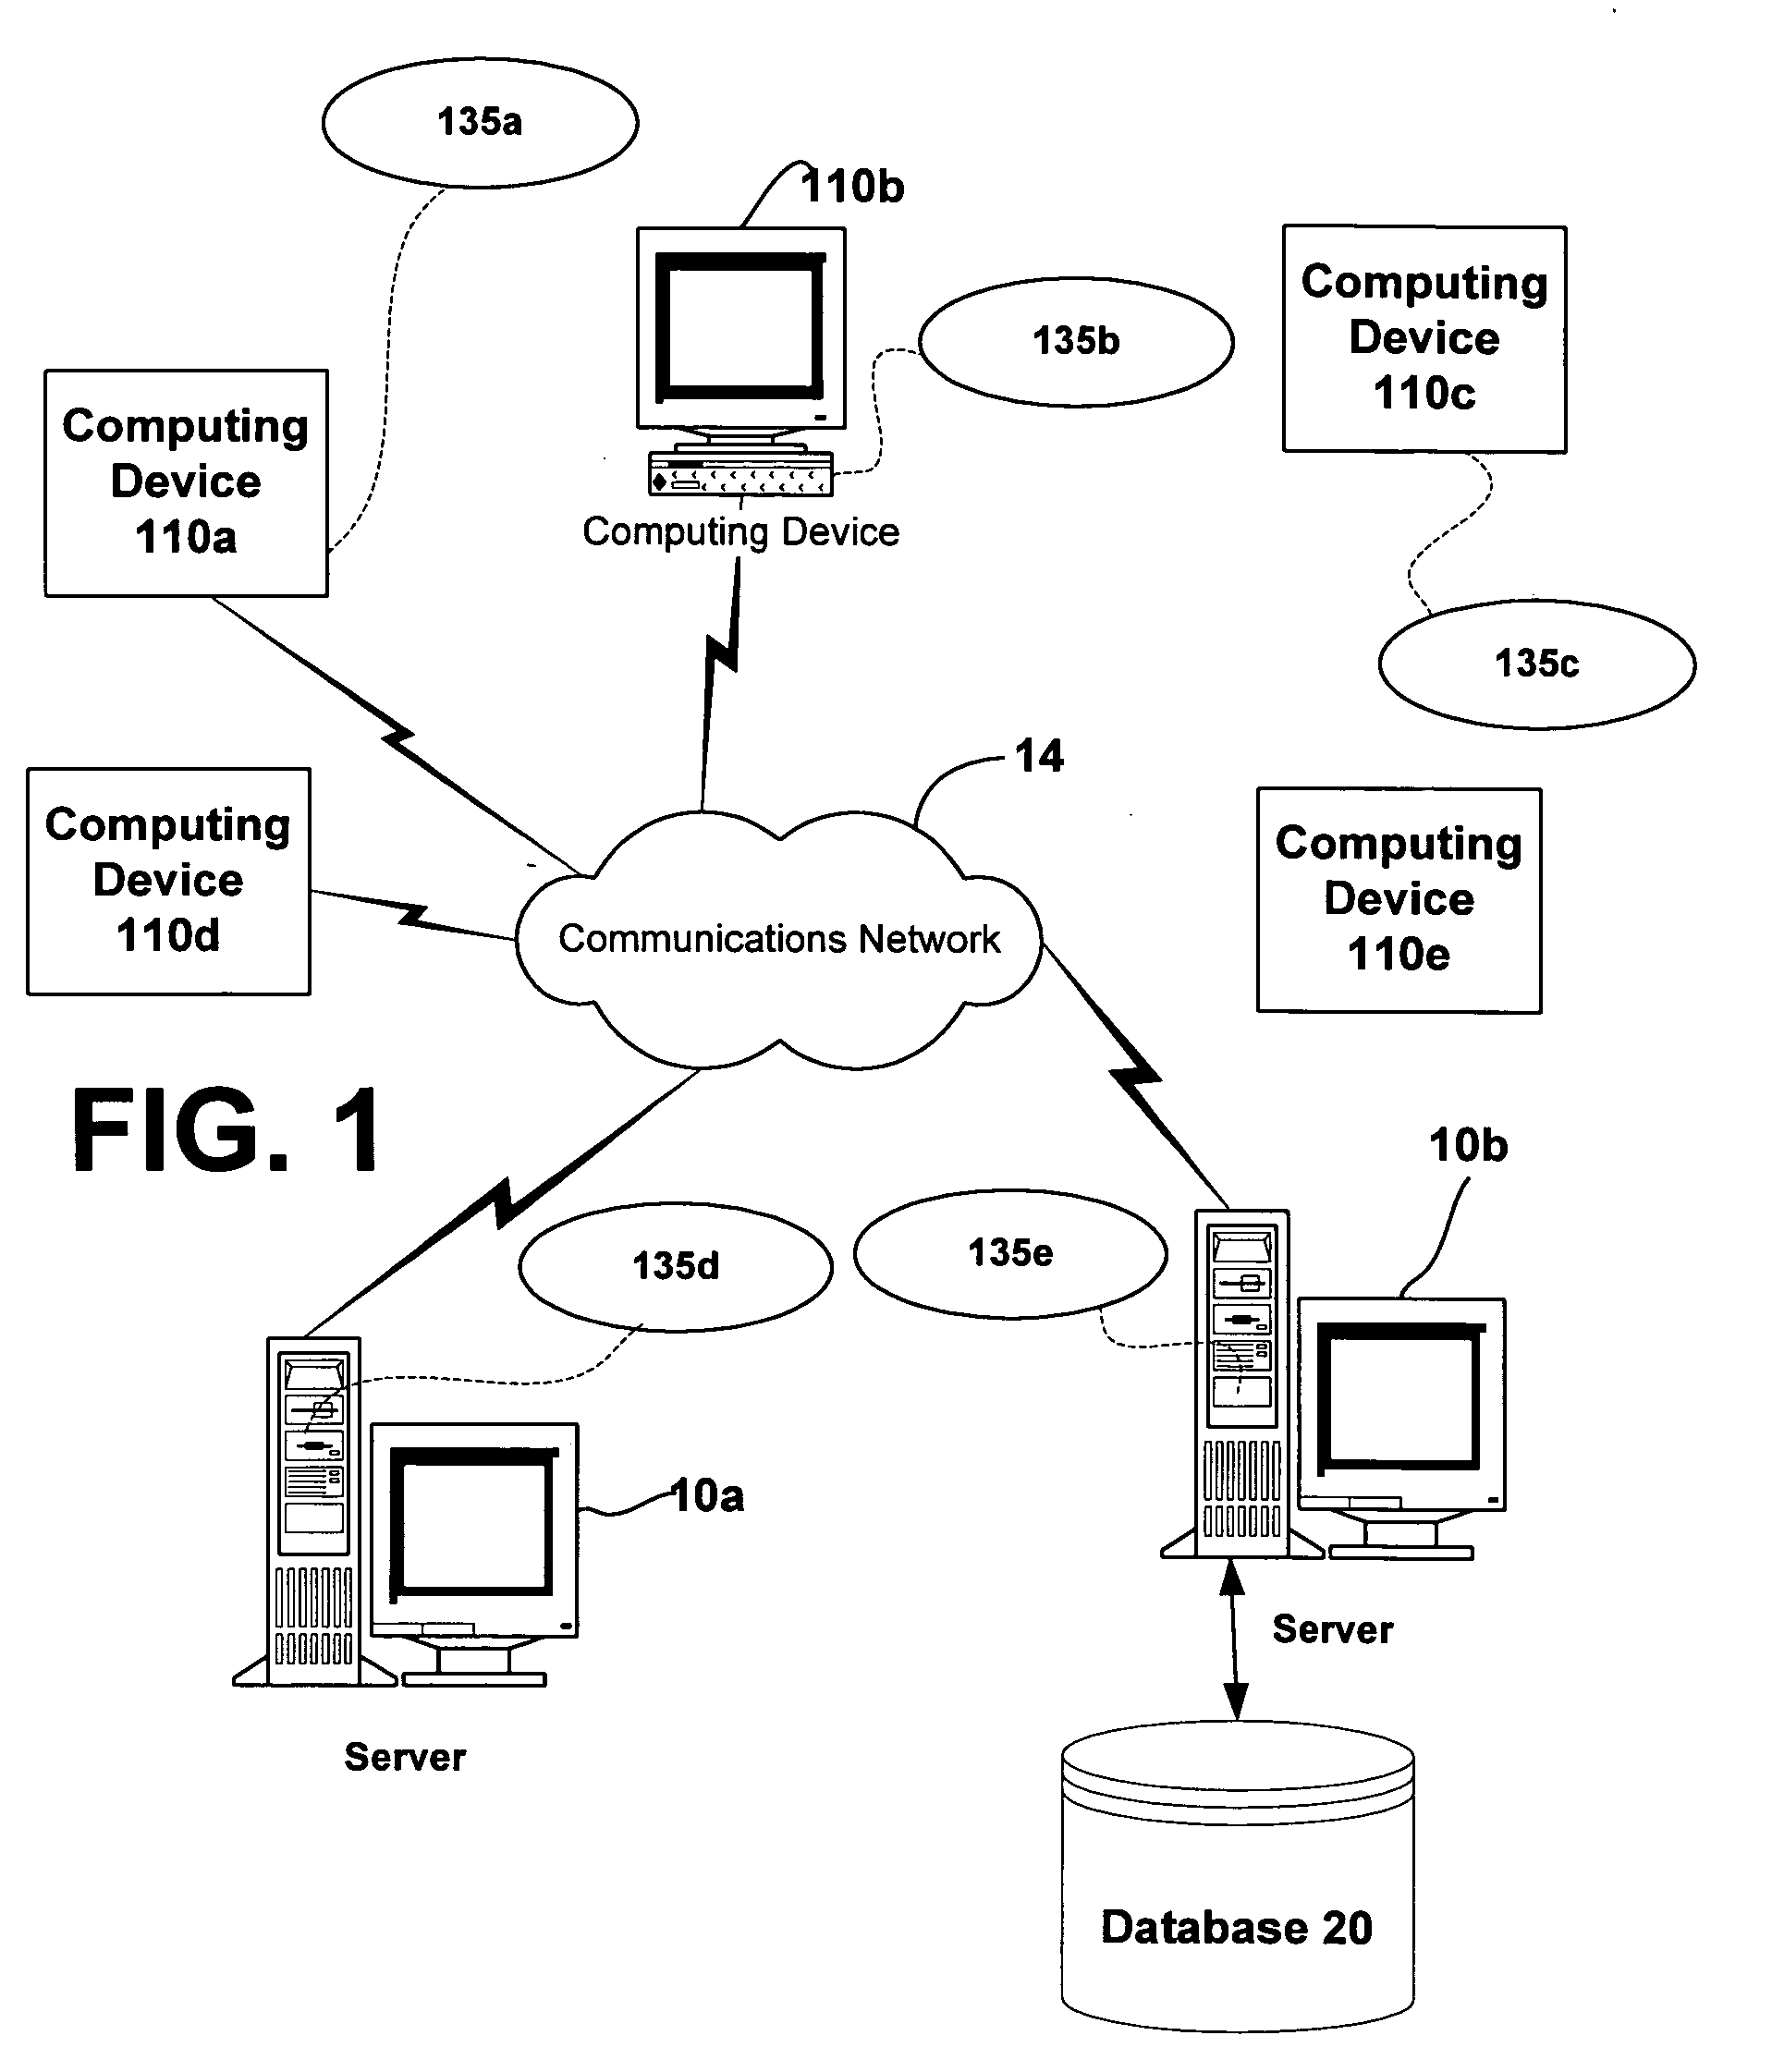 System and methods for providing versioning of software components in a computer programming language